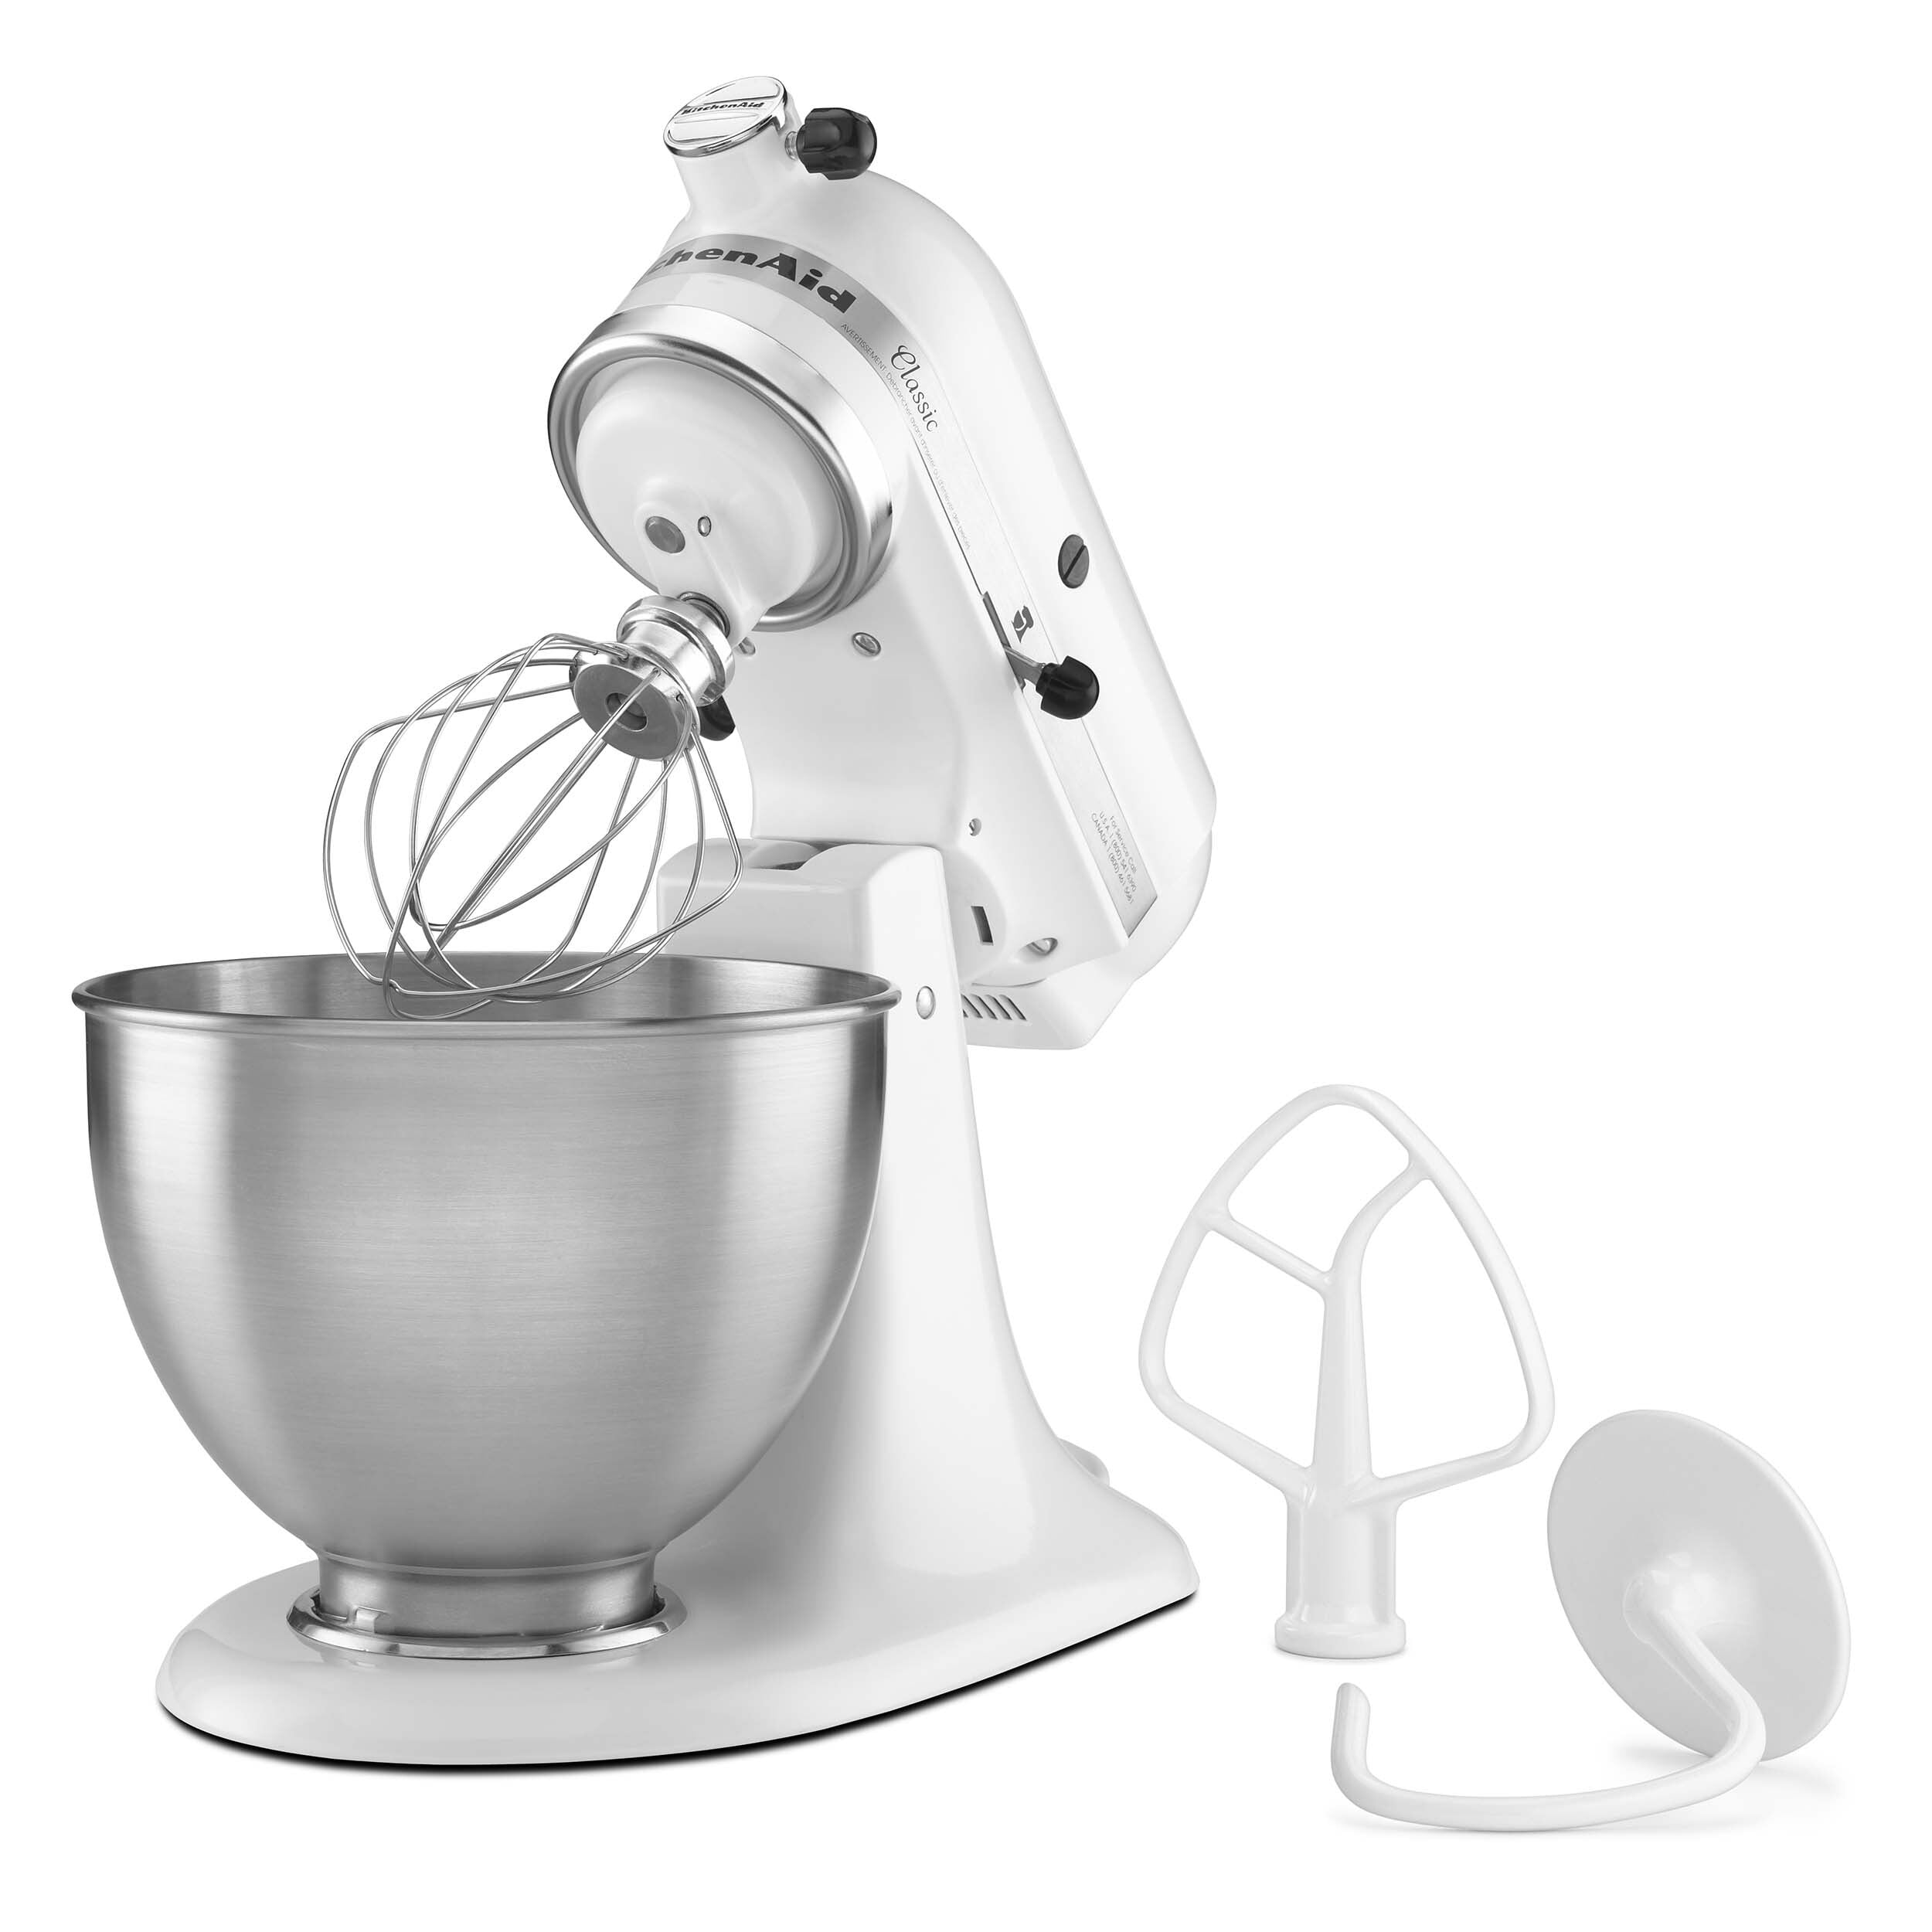  Stainless Steel Flat Beater for KitchenAid 4.5qt-5qt Tilt-Head  Stand Mixer, Fit for Classic, Classic Plus and Artisan Mixer K45SS, KSM75,  KSM90, KSM110, KSM125, KSM150 Heavy Duty and Dishwasher Safe: Home 